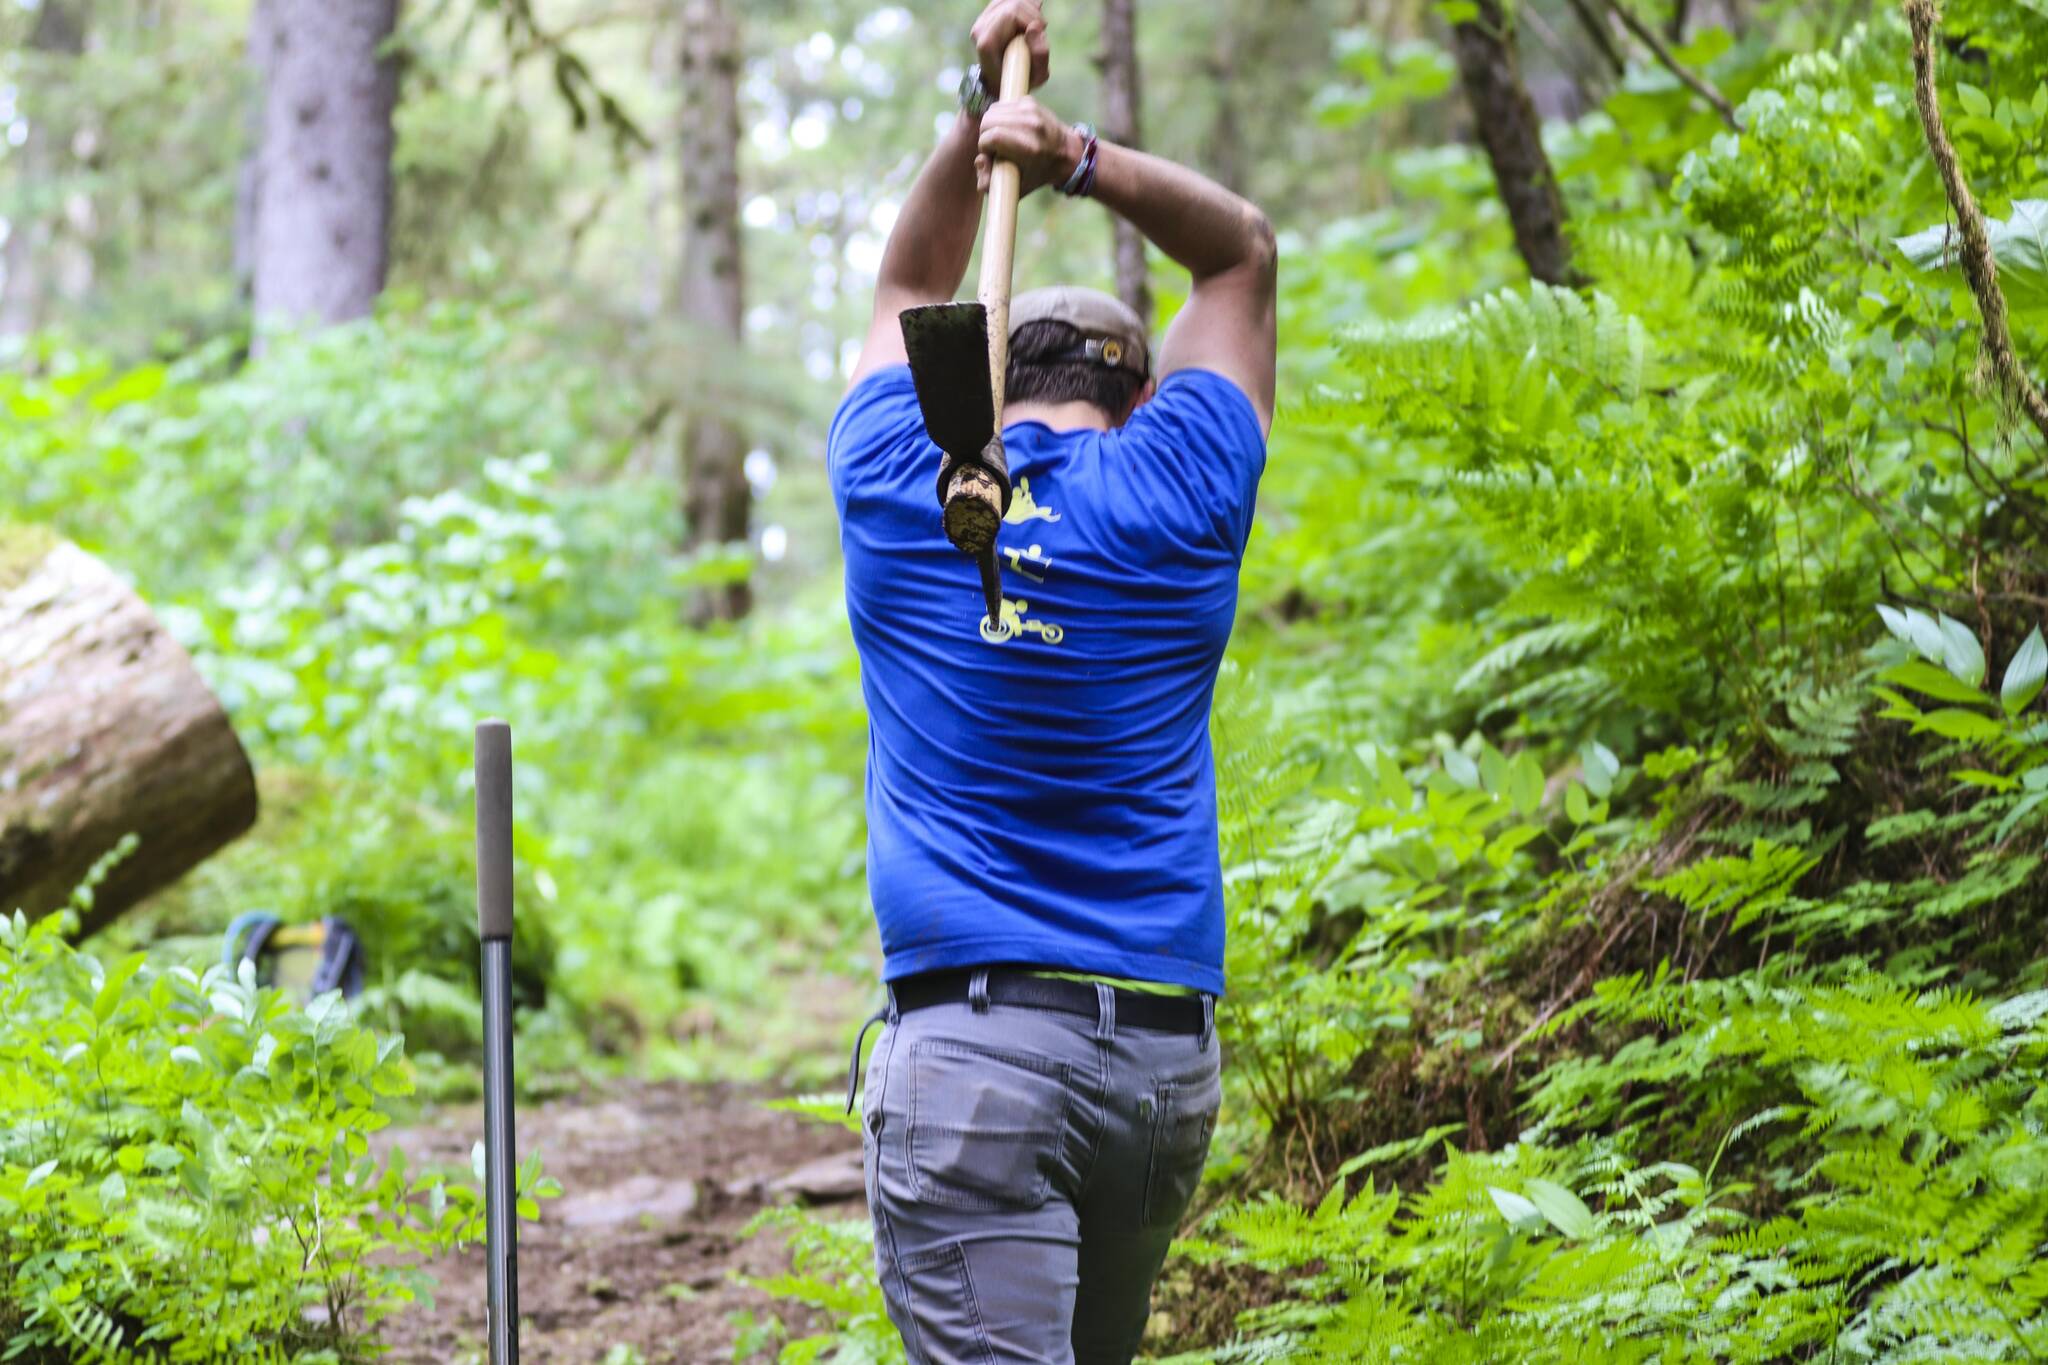 Dan Parks swings a pickax as a volunteer for Trail Mix Inc.’s National Trails Day event on Lemon Creek Trail on June 4, 2022. (Michael S. Lockett / Juneau Empire)